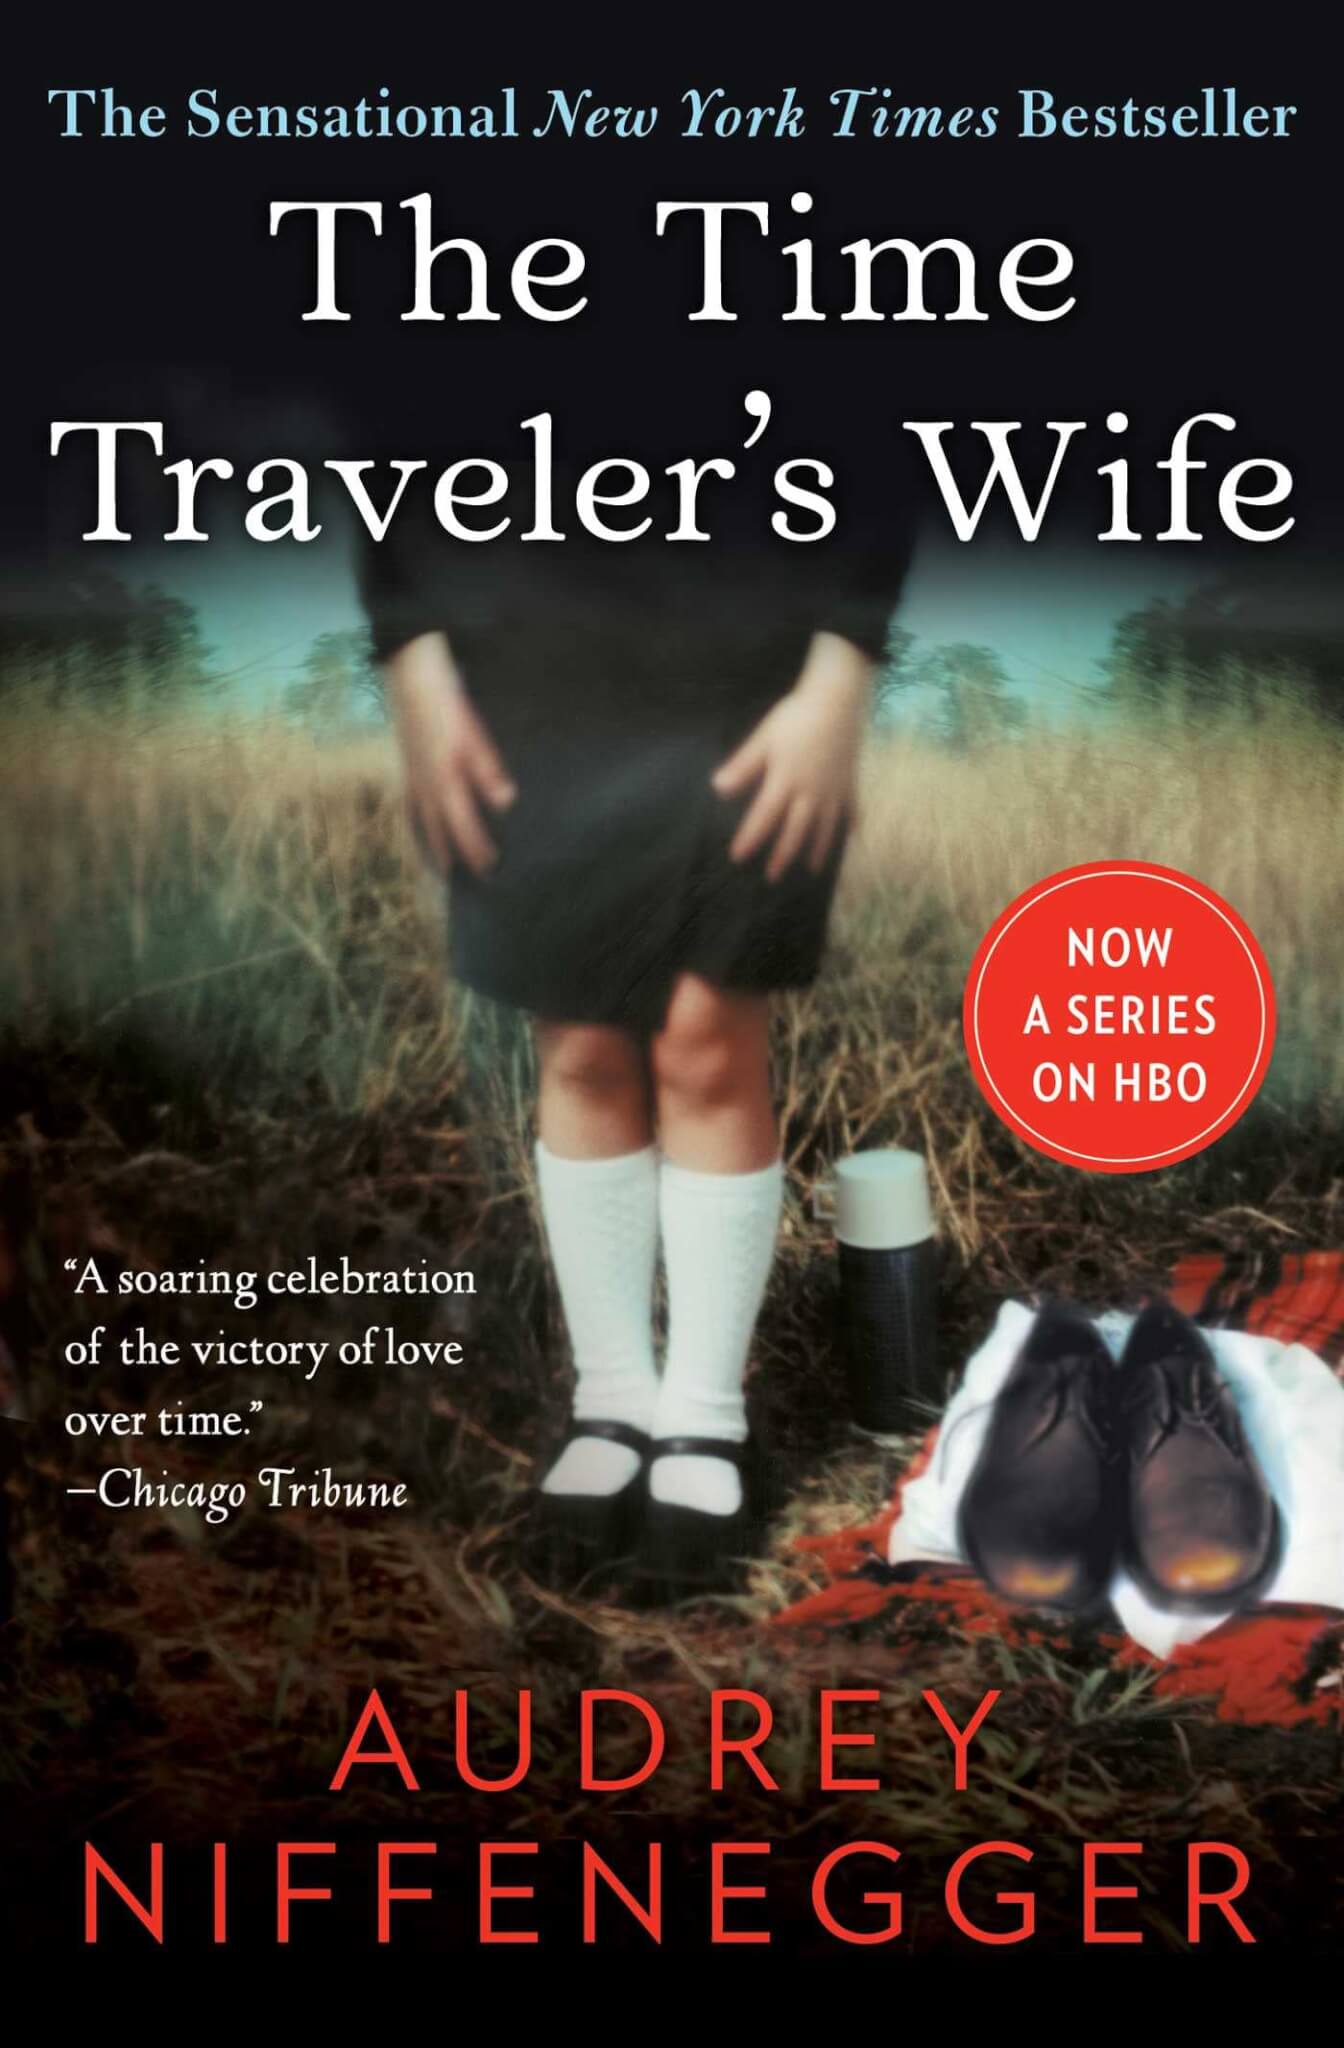 "The Time Traveler's Wife" (2003) by Audrey Niffenegger